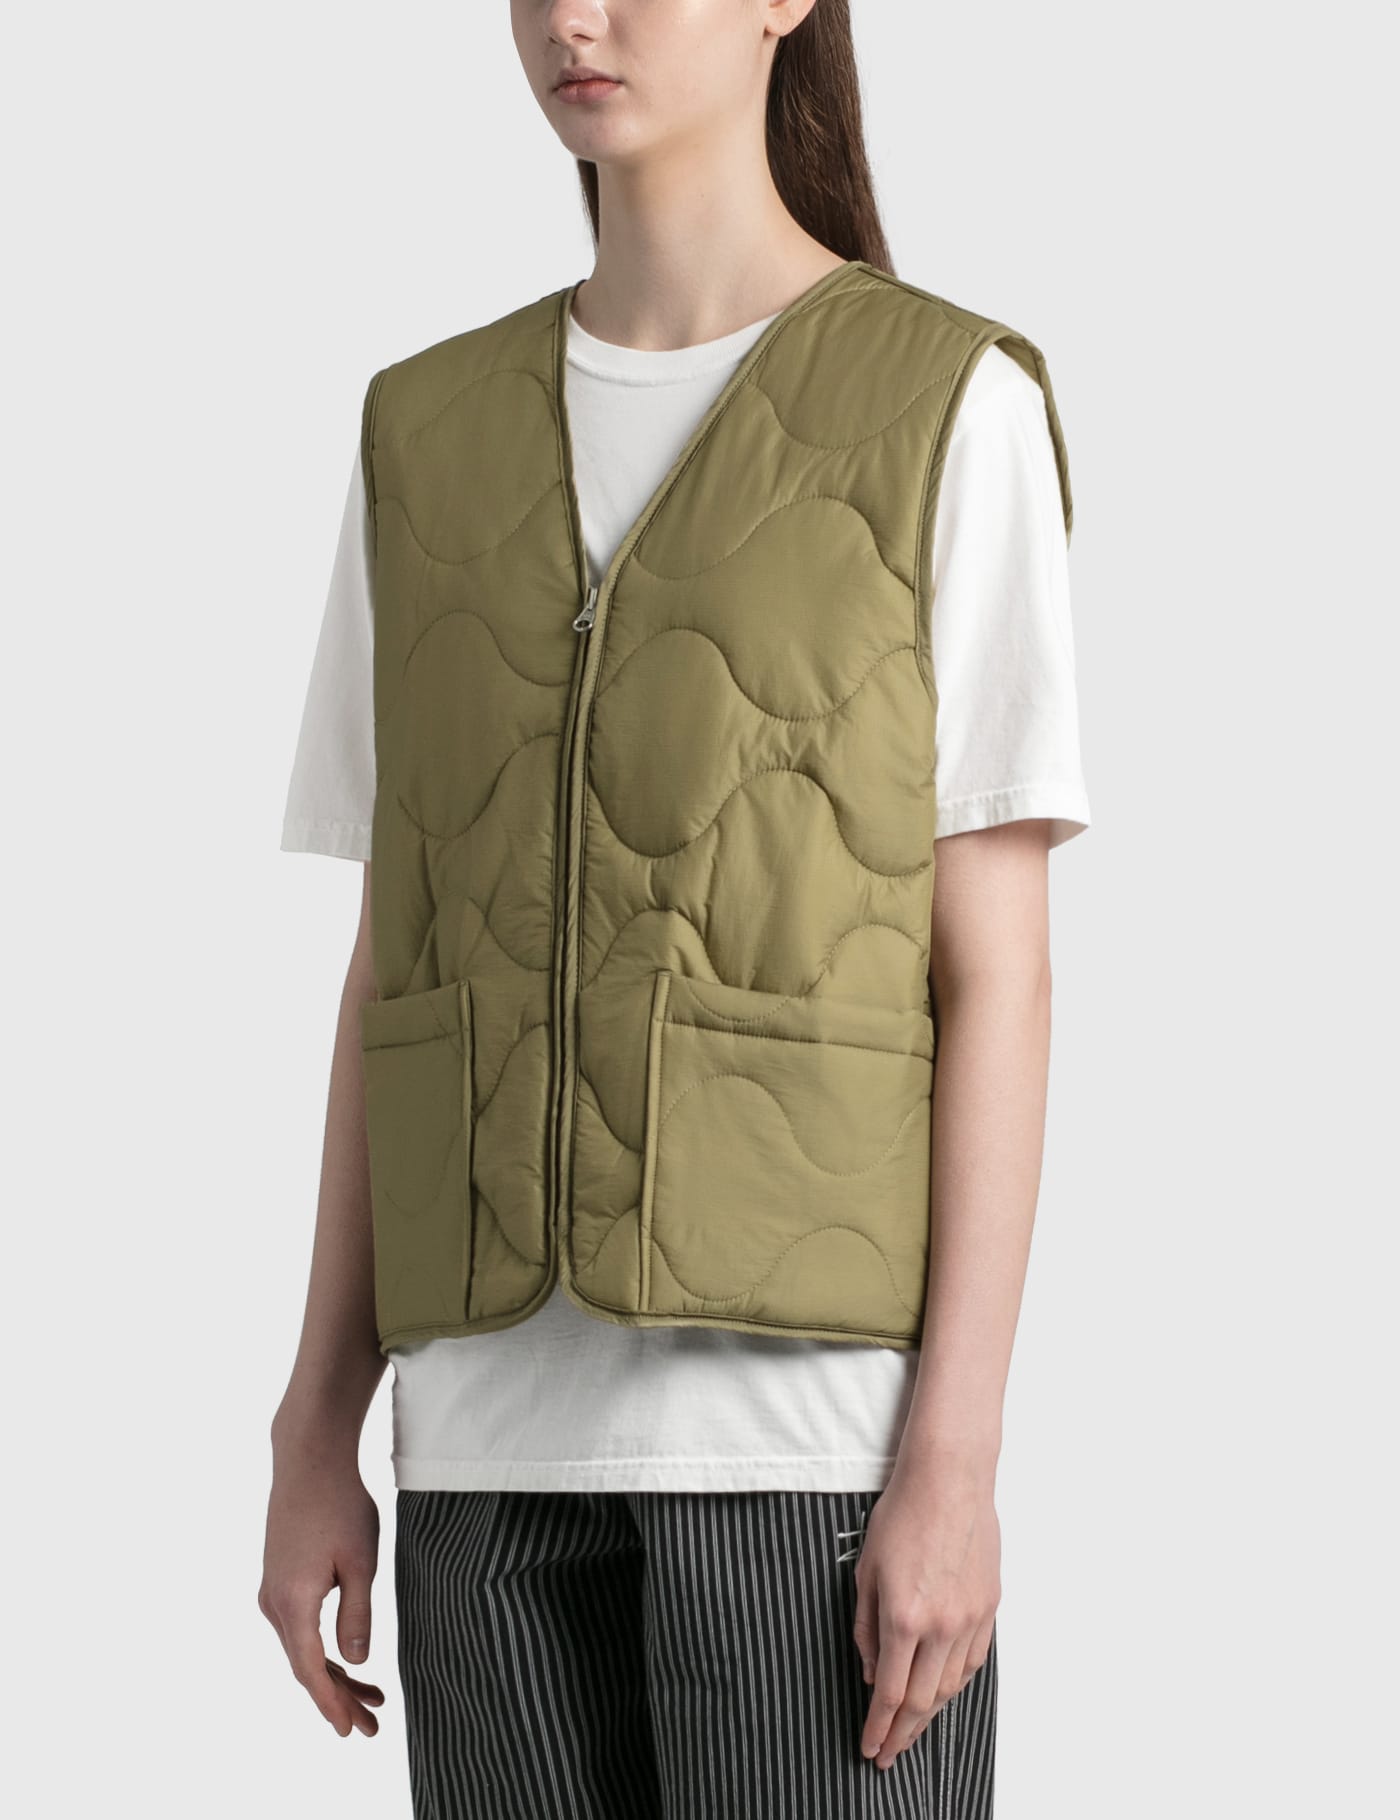 Stüssy - Quilted Liner Vest | HBX - Globally Curated Fashion and 